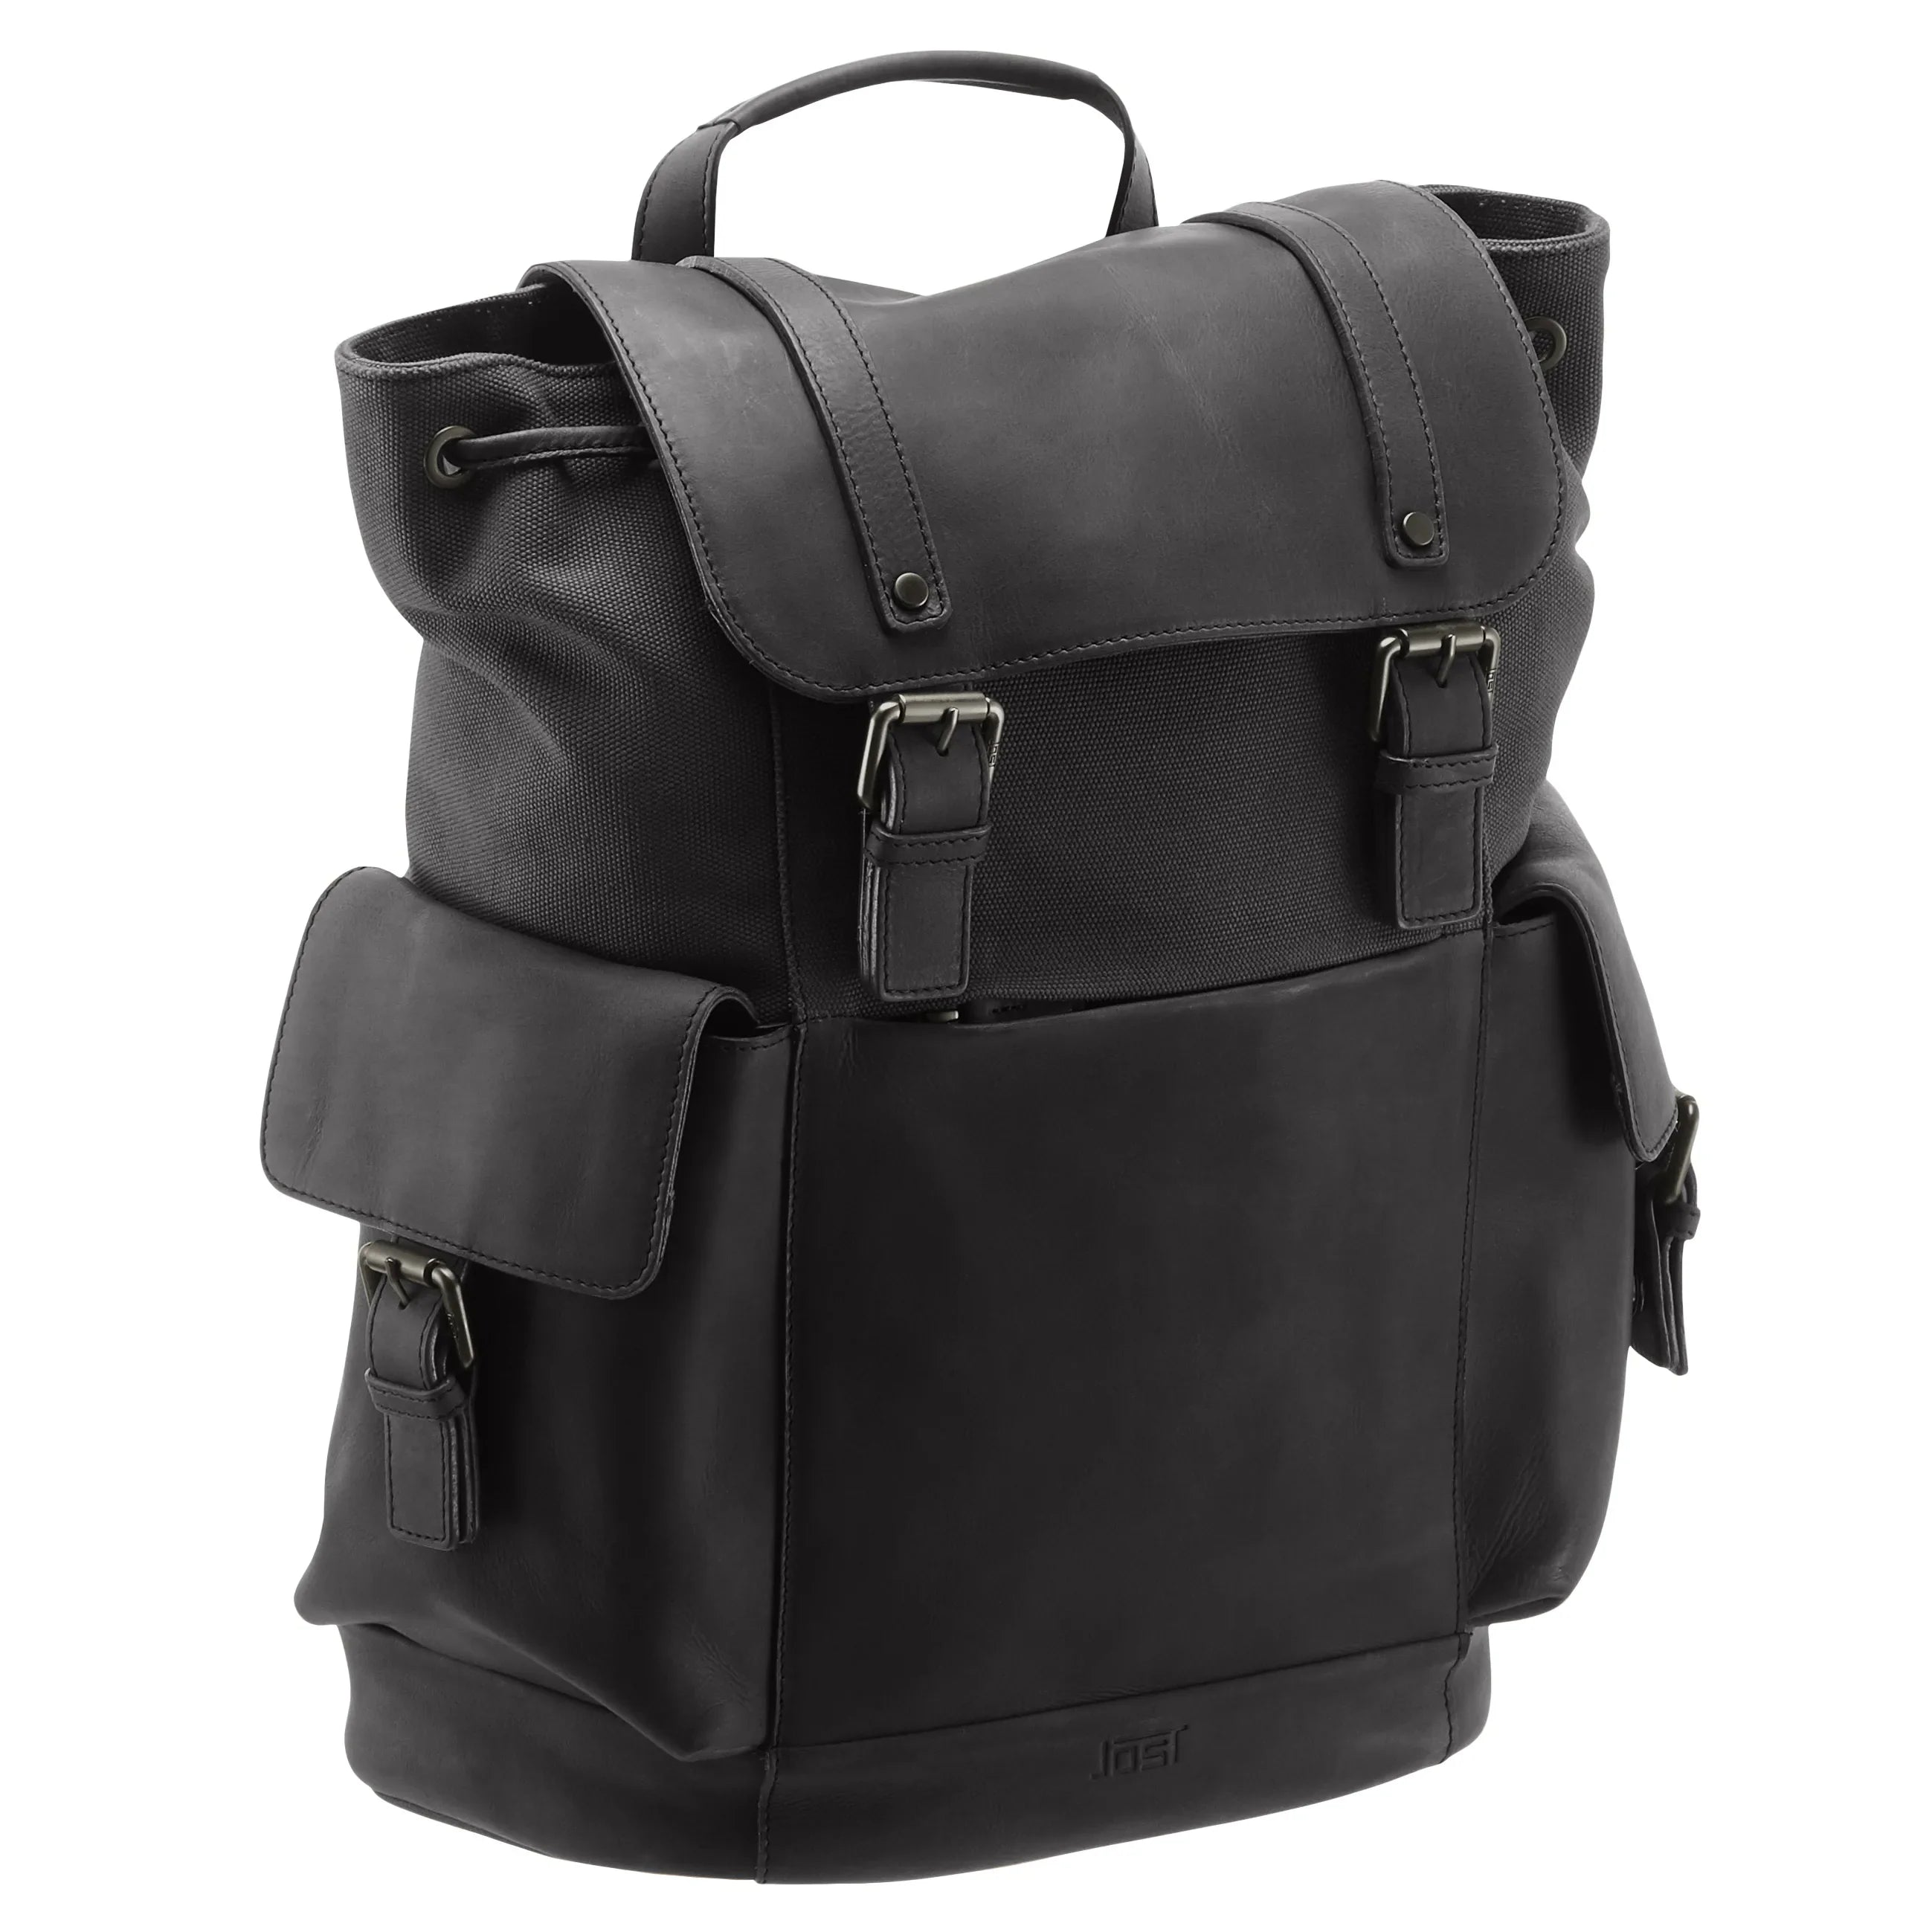 Jost Salo bag backpack with laptop compartment 45 cm - black